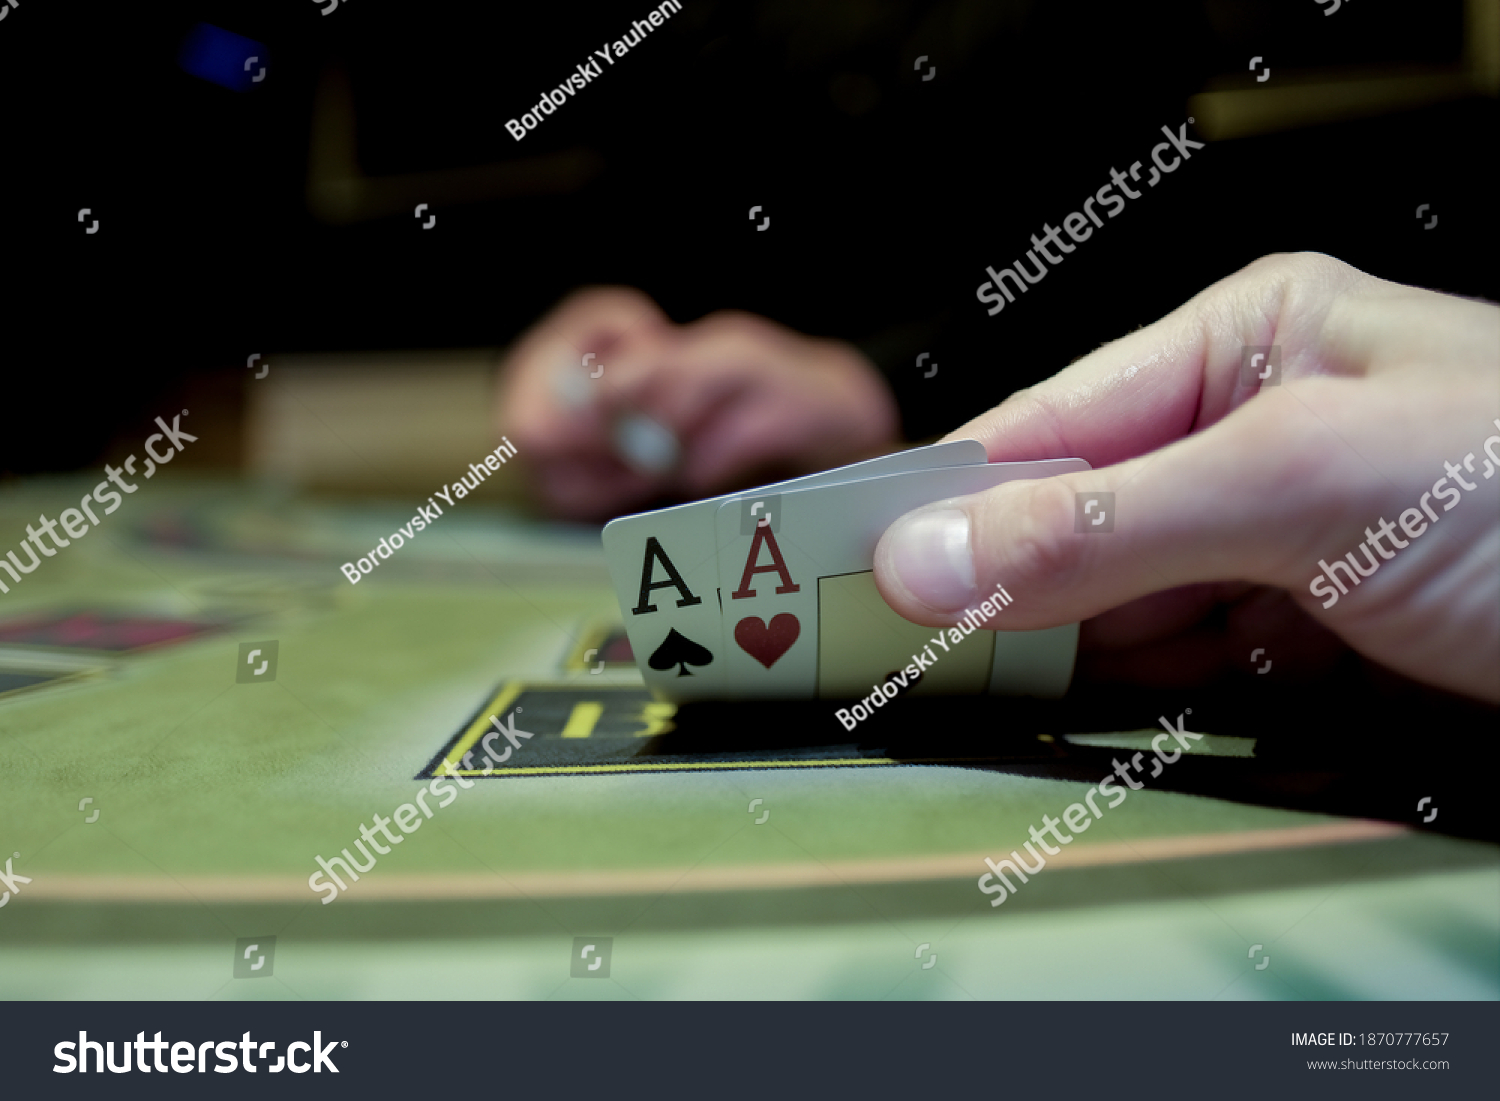 Casino interior. Card game of poker. Texas hold'em poker. The combination is a pair of aces for the player. Big win. #1870777657